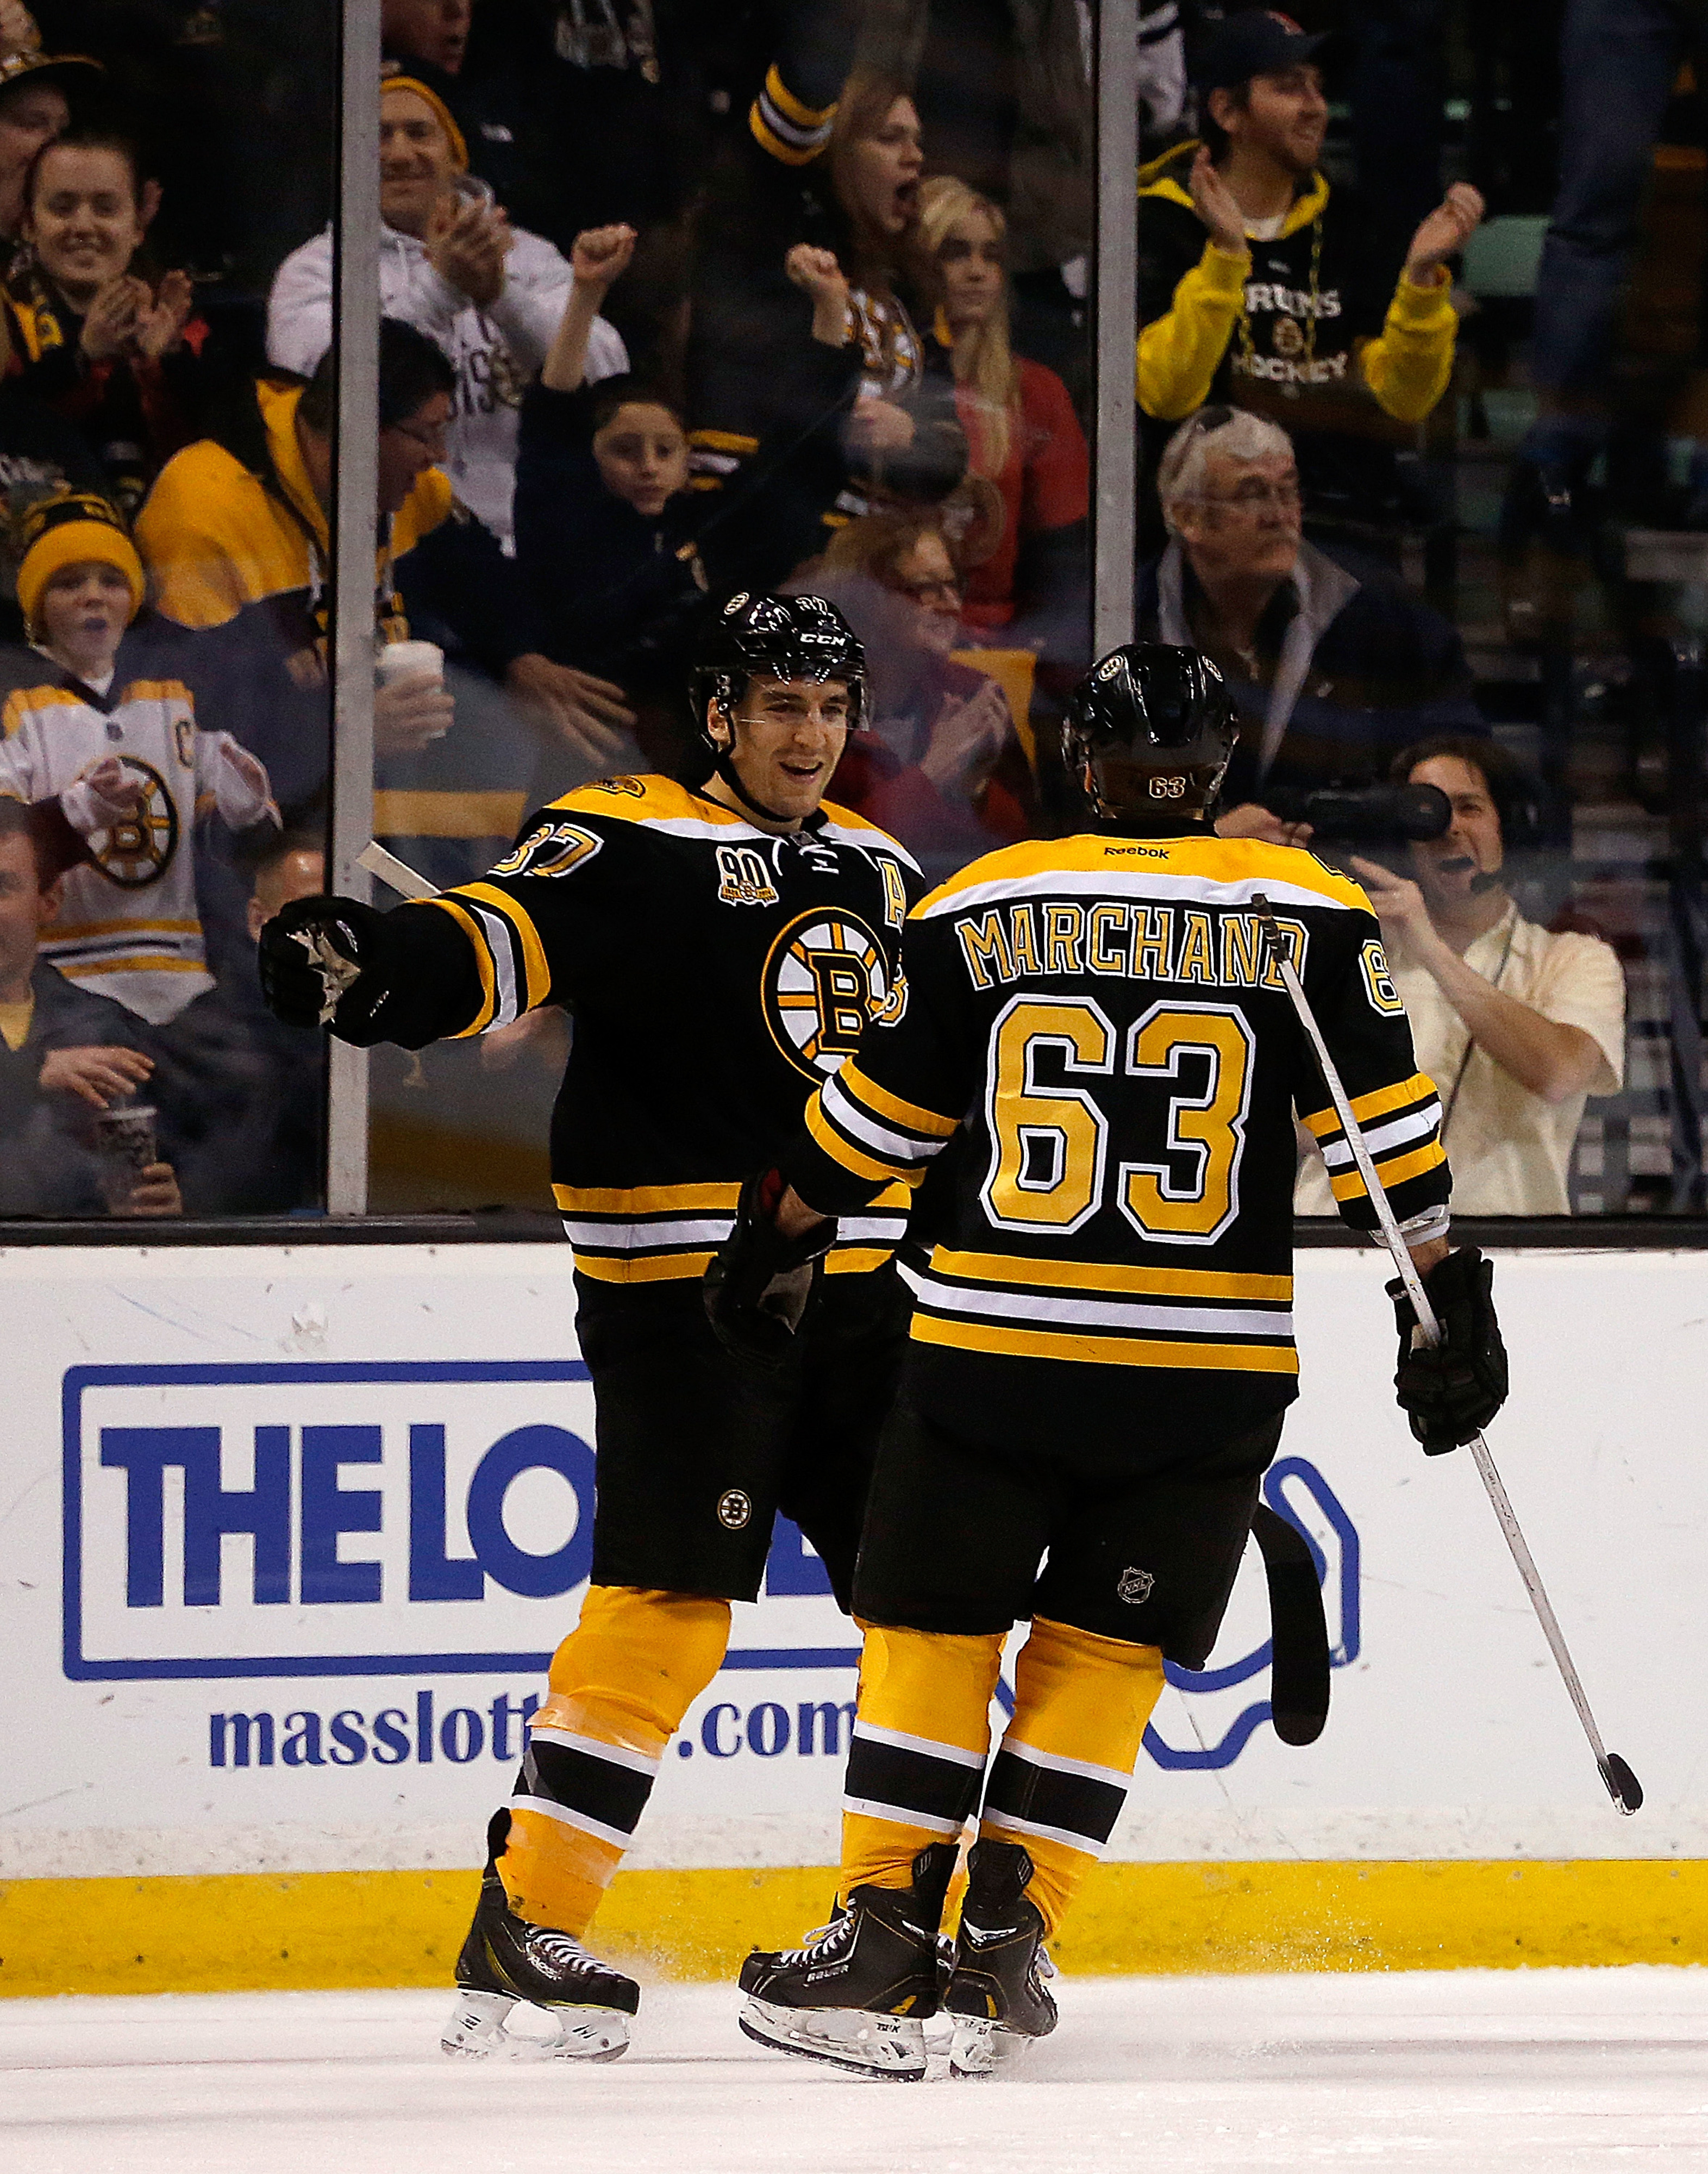 There were many pictures to choose from for this article, all of Bruins celebrating goals